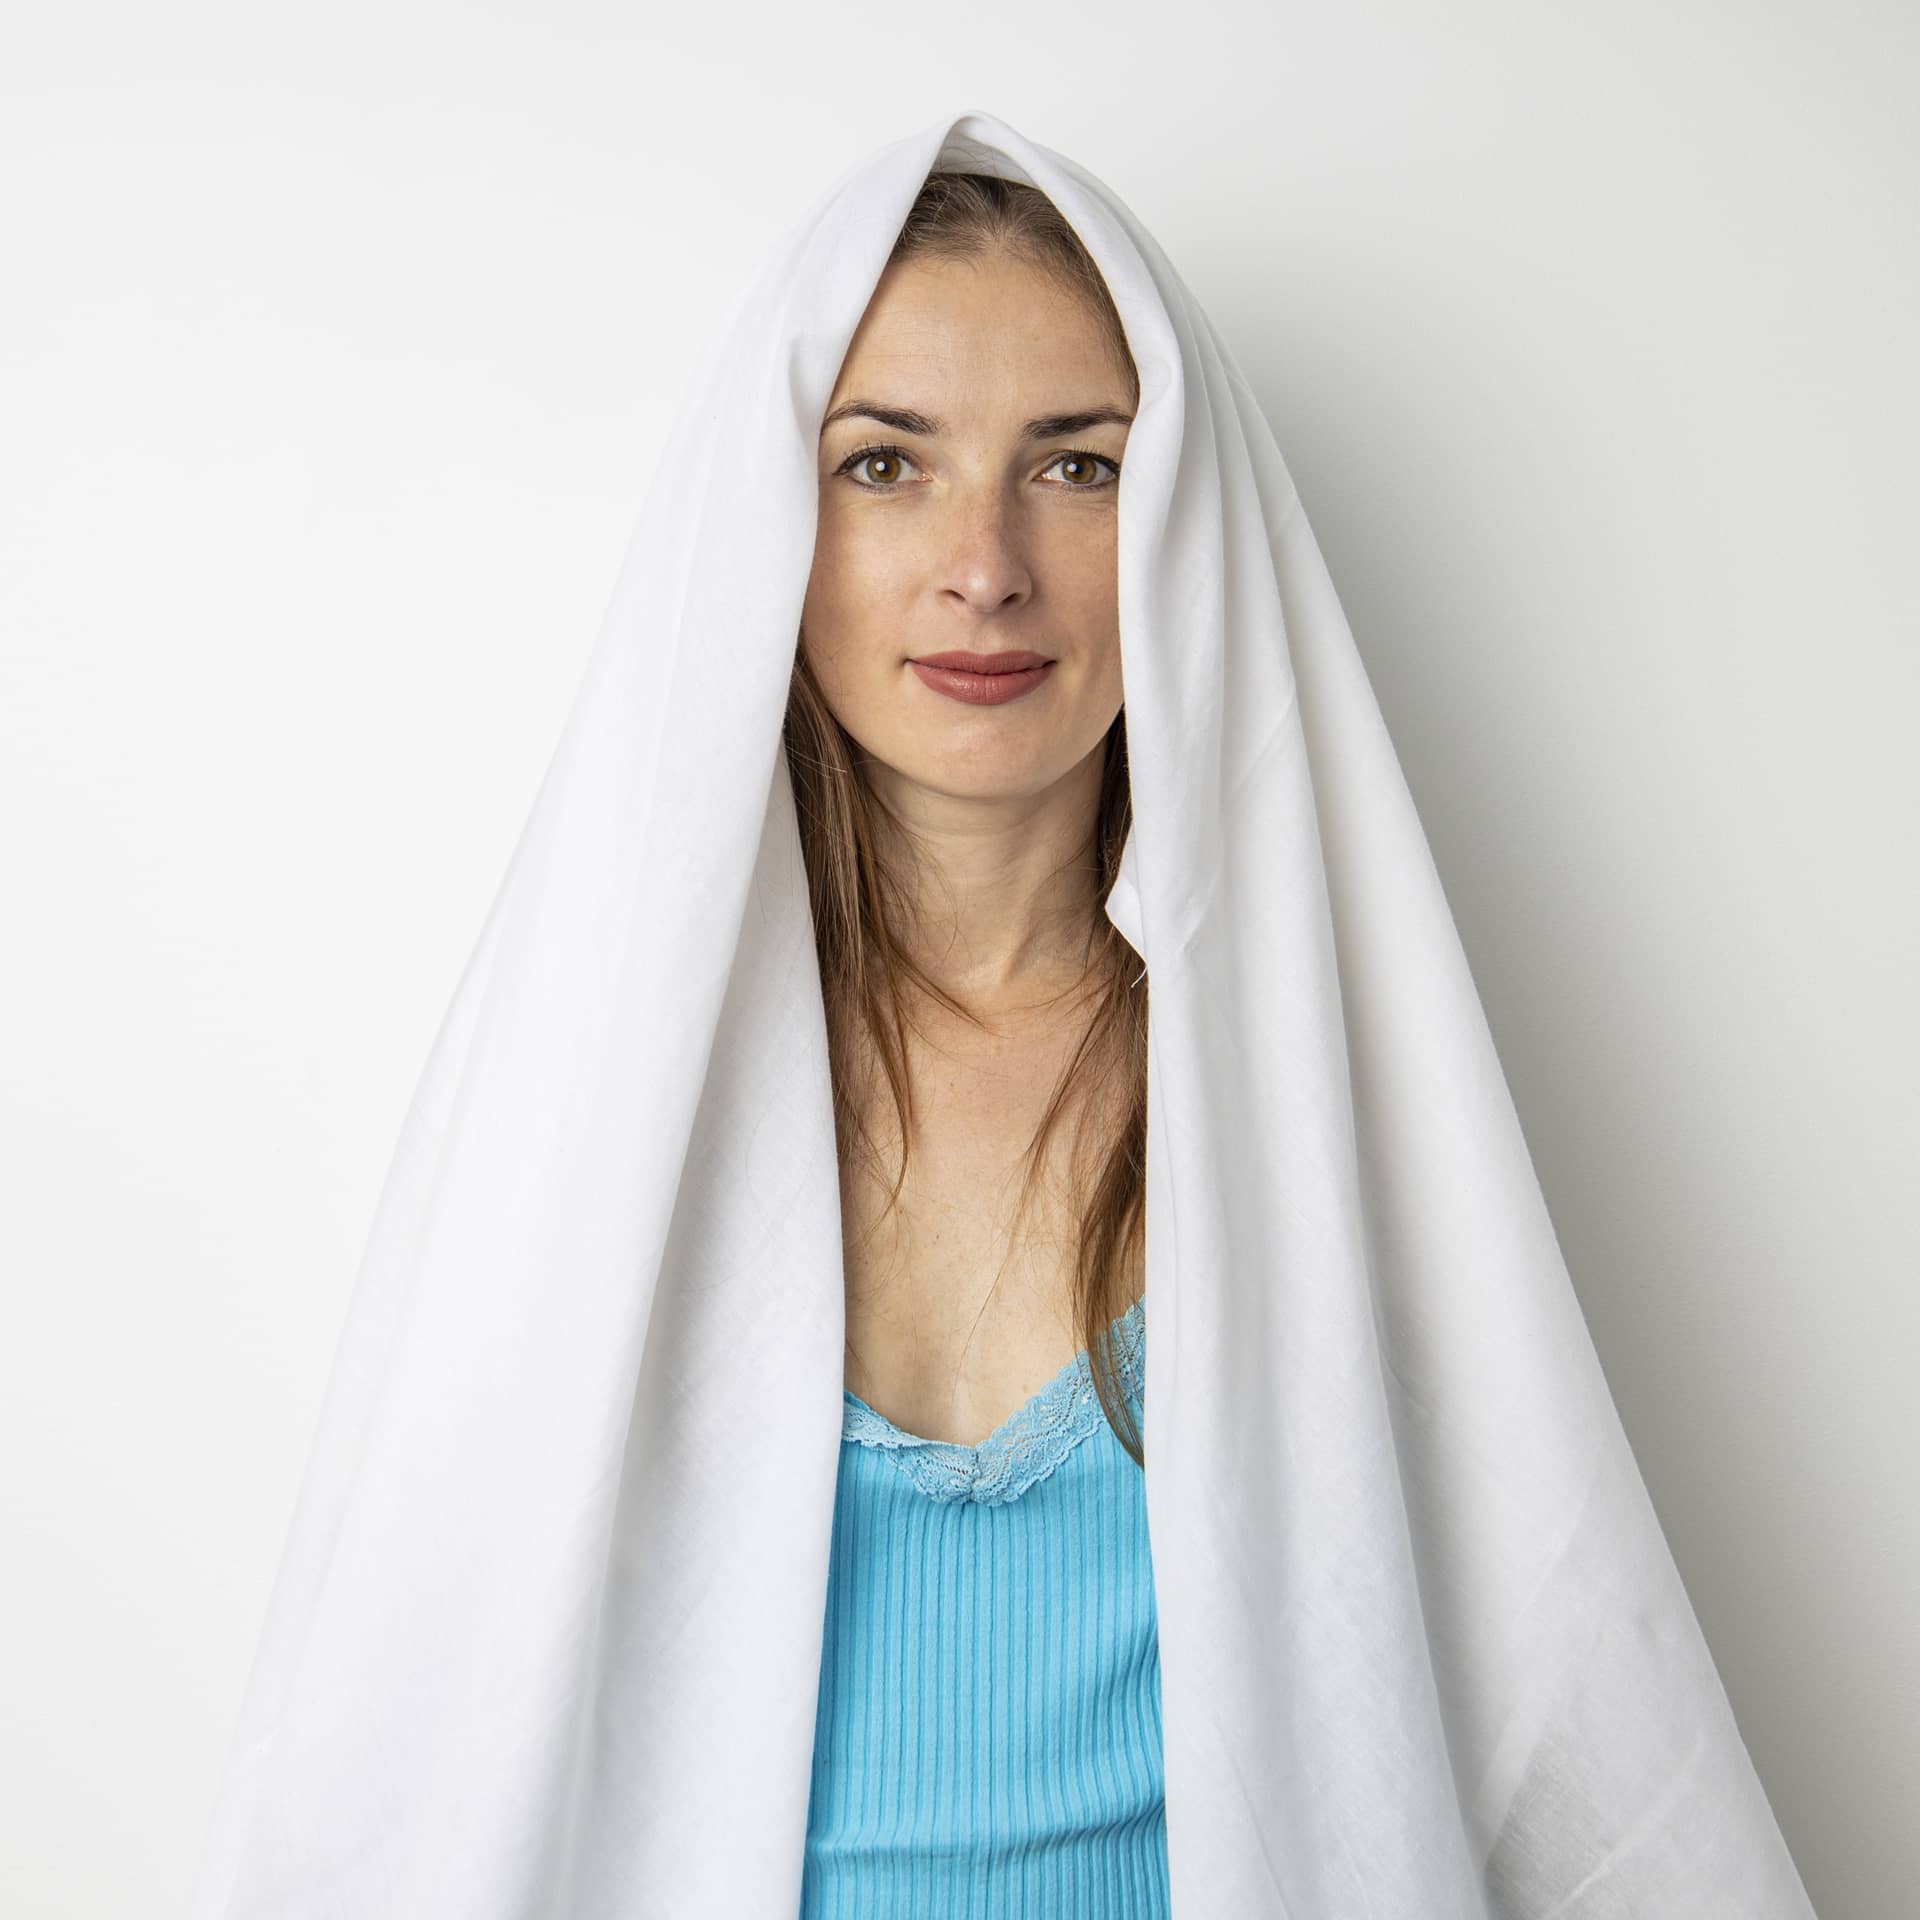 Smiling young woman covering her head with sheet white background